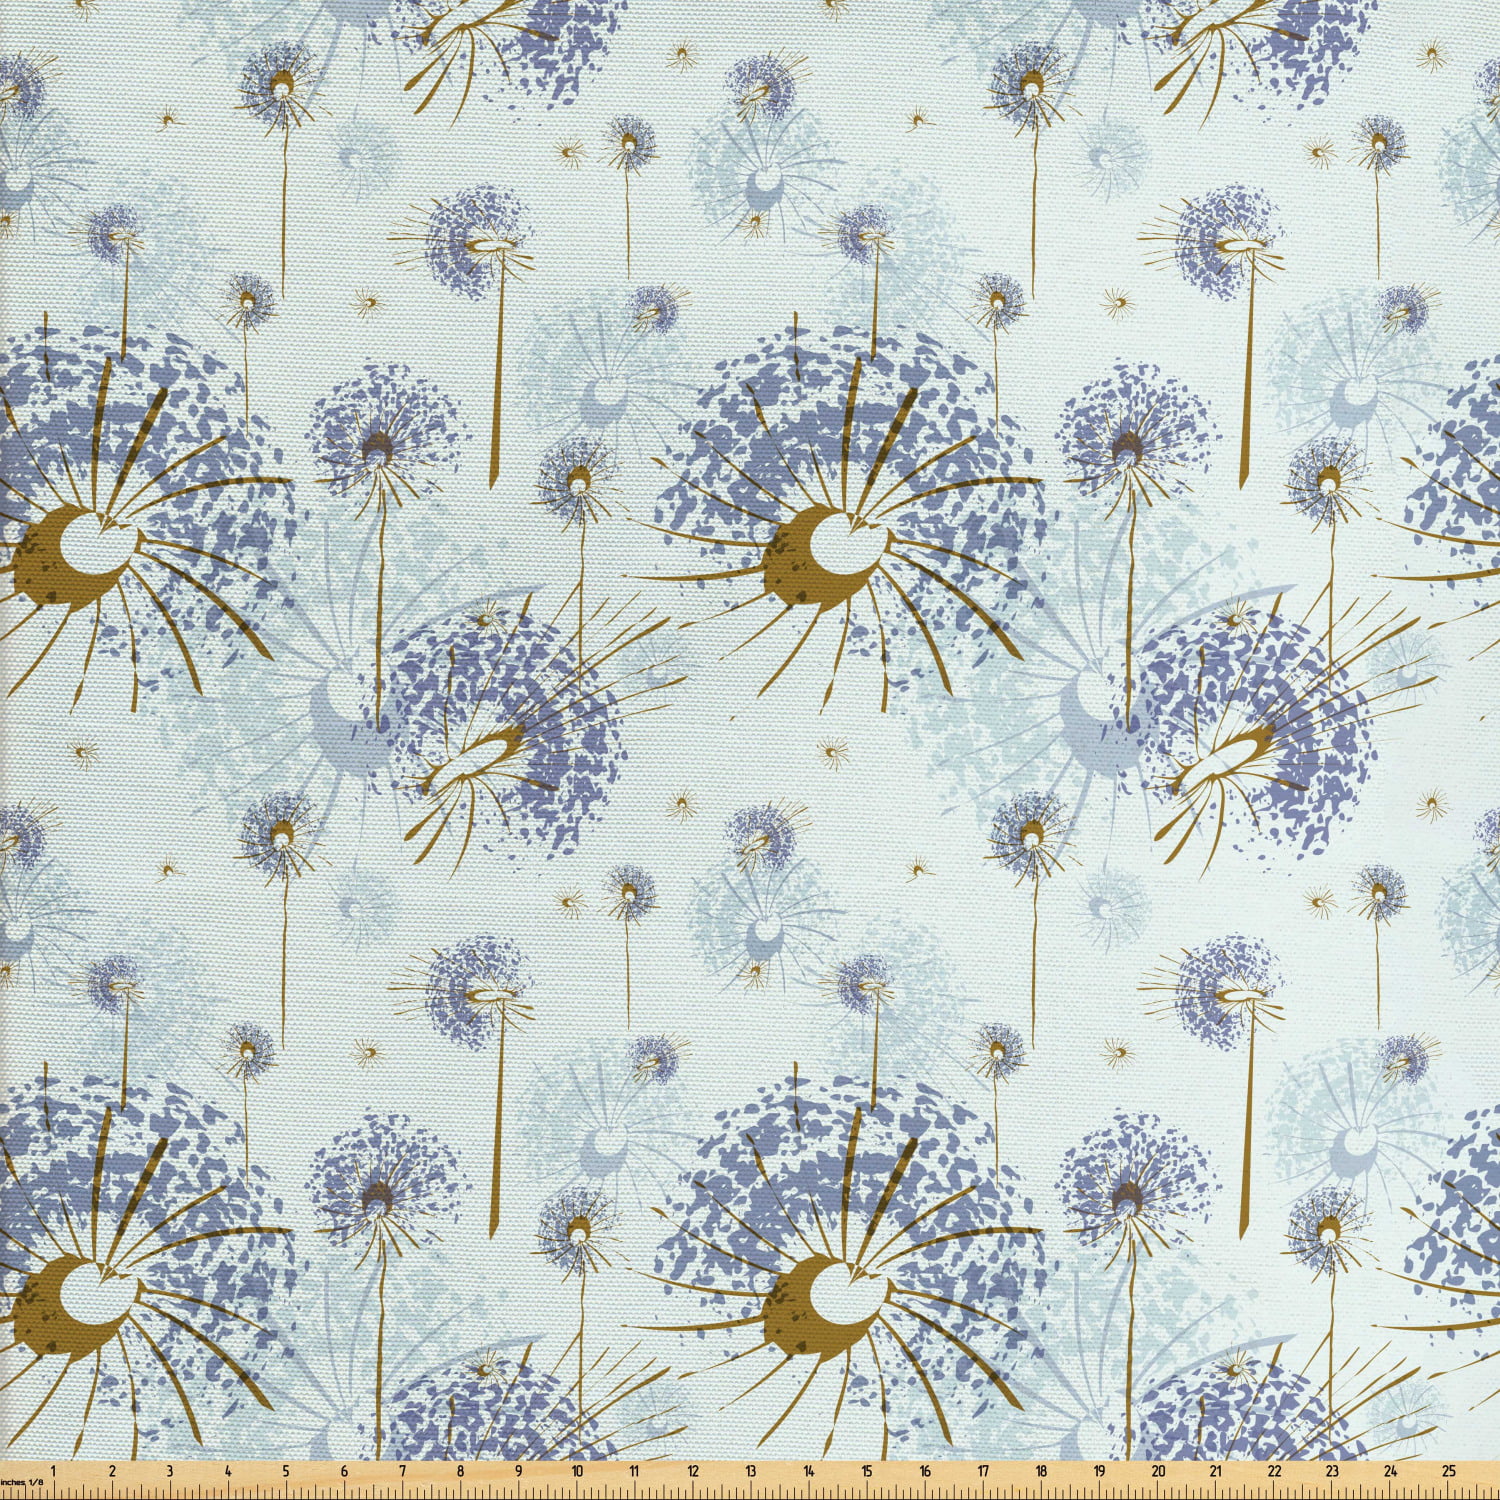 Dandelion Fabric by The Yard, Grunge Pattern of Abstract Botanical